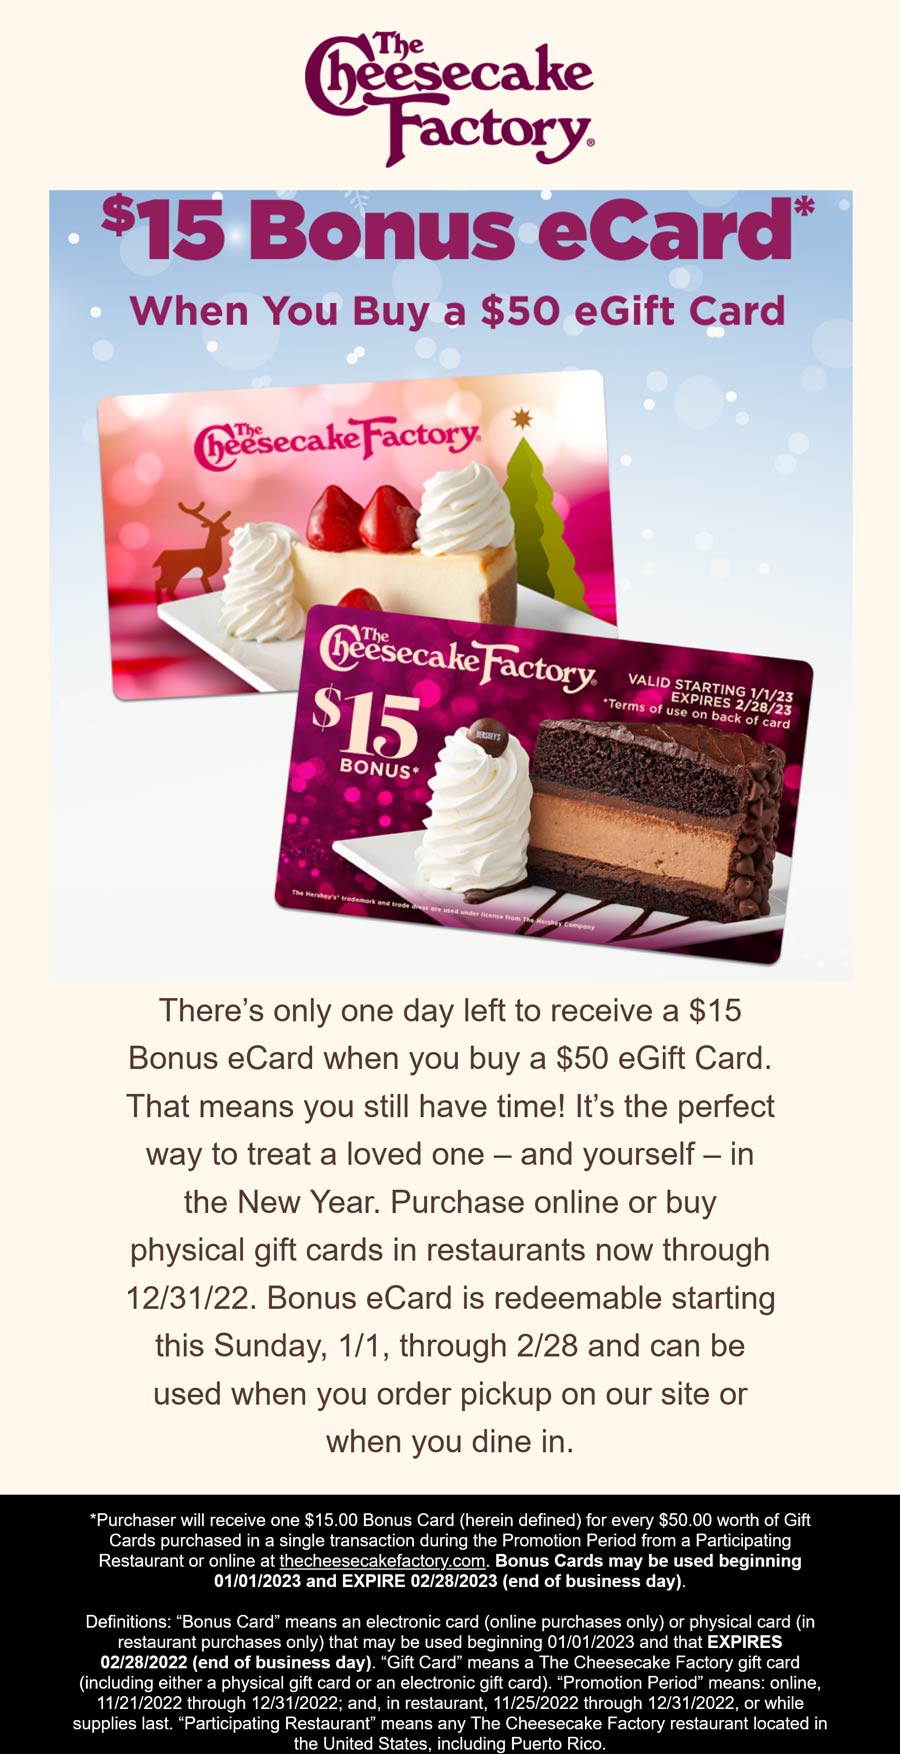 The Cheesecake Factory restaurants Coupon  $15 card free with your $50 card at The Cheesecake Factory restaurants #thecheesecakefactory 